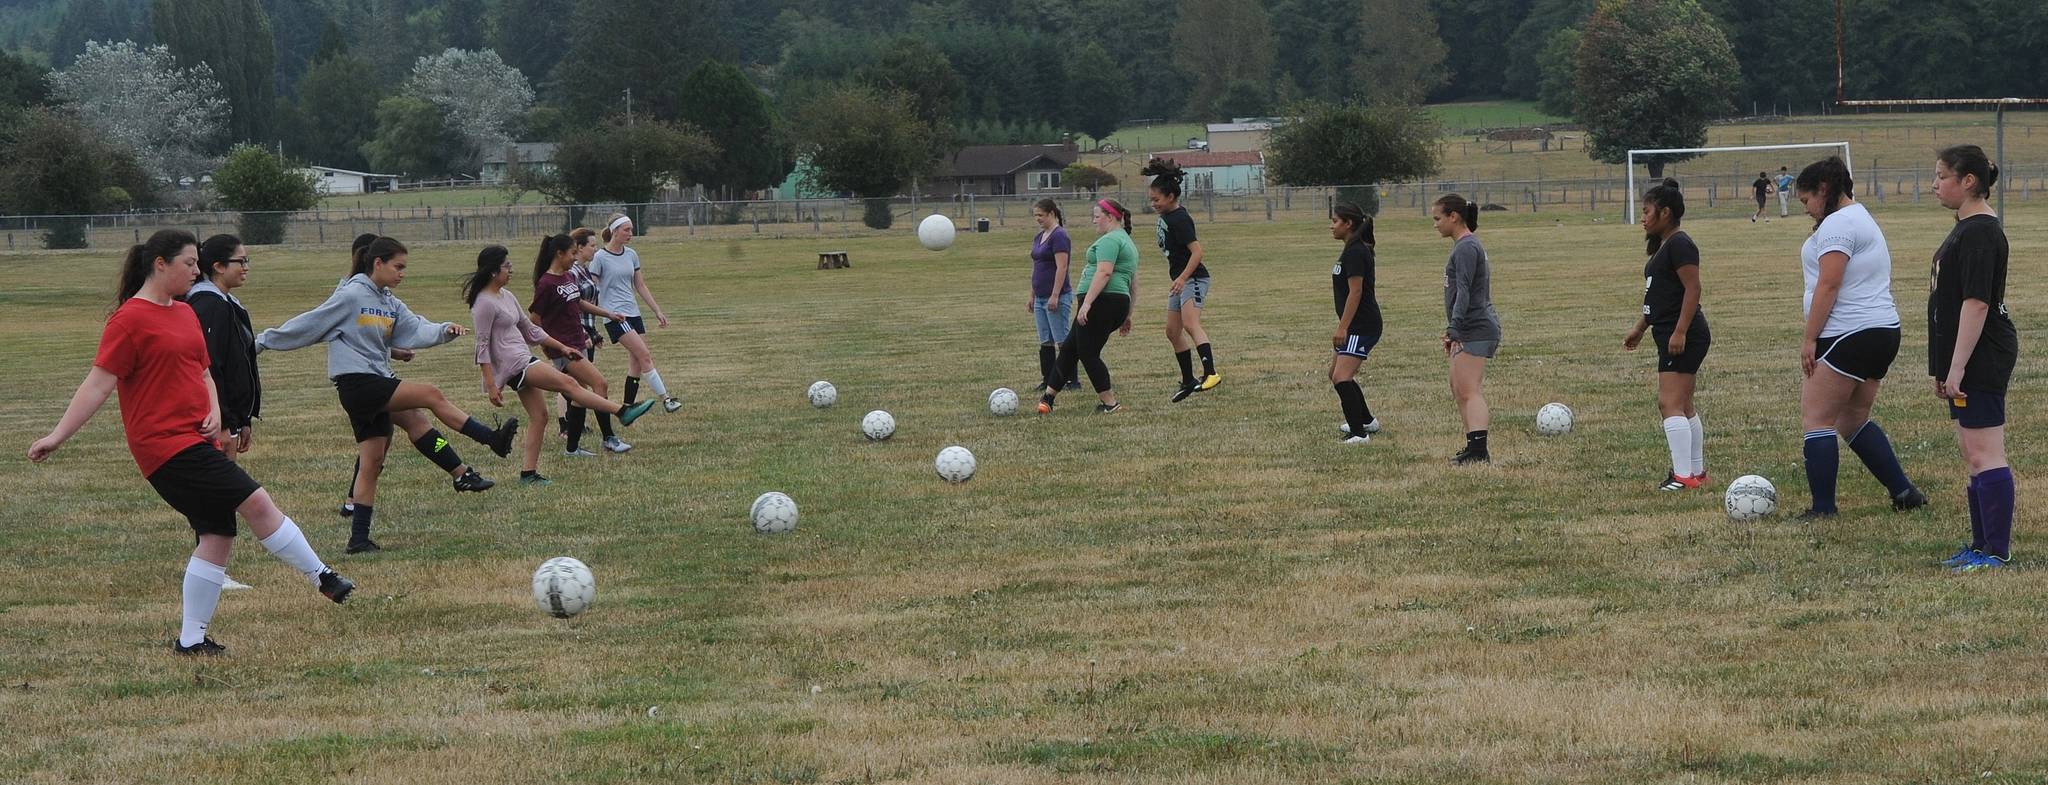 The girl’s soccer team practices on the Spartan practice field in preparation for the upcoming season. Photo by Lonnie Archibald